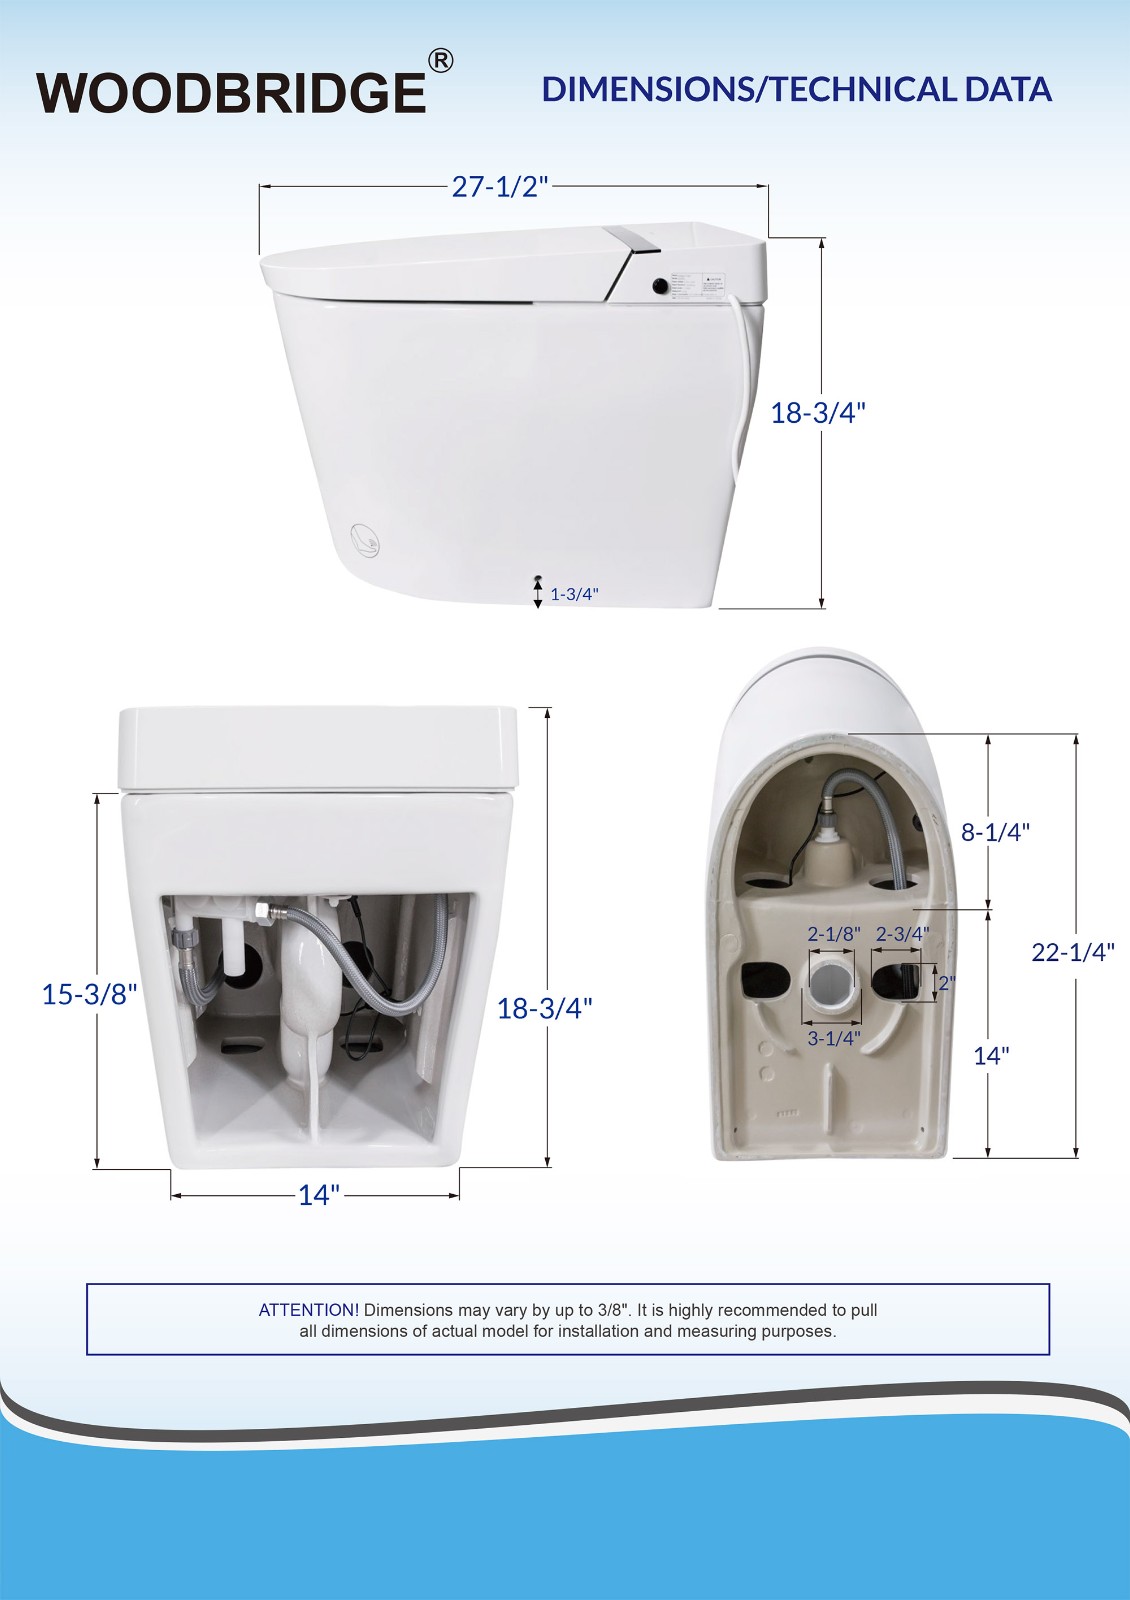  WOODBRIDGE B0990S One Piece Elongated Smart Toilet Bidet with Auto Open & Close, Auto Flush, Foot Sensor Flush, LED Temperature Display, Heated Seat and Integrated Multi Function Remote Control, White_2114